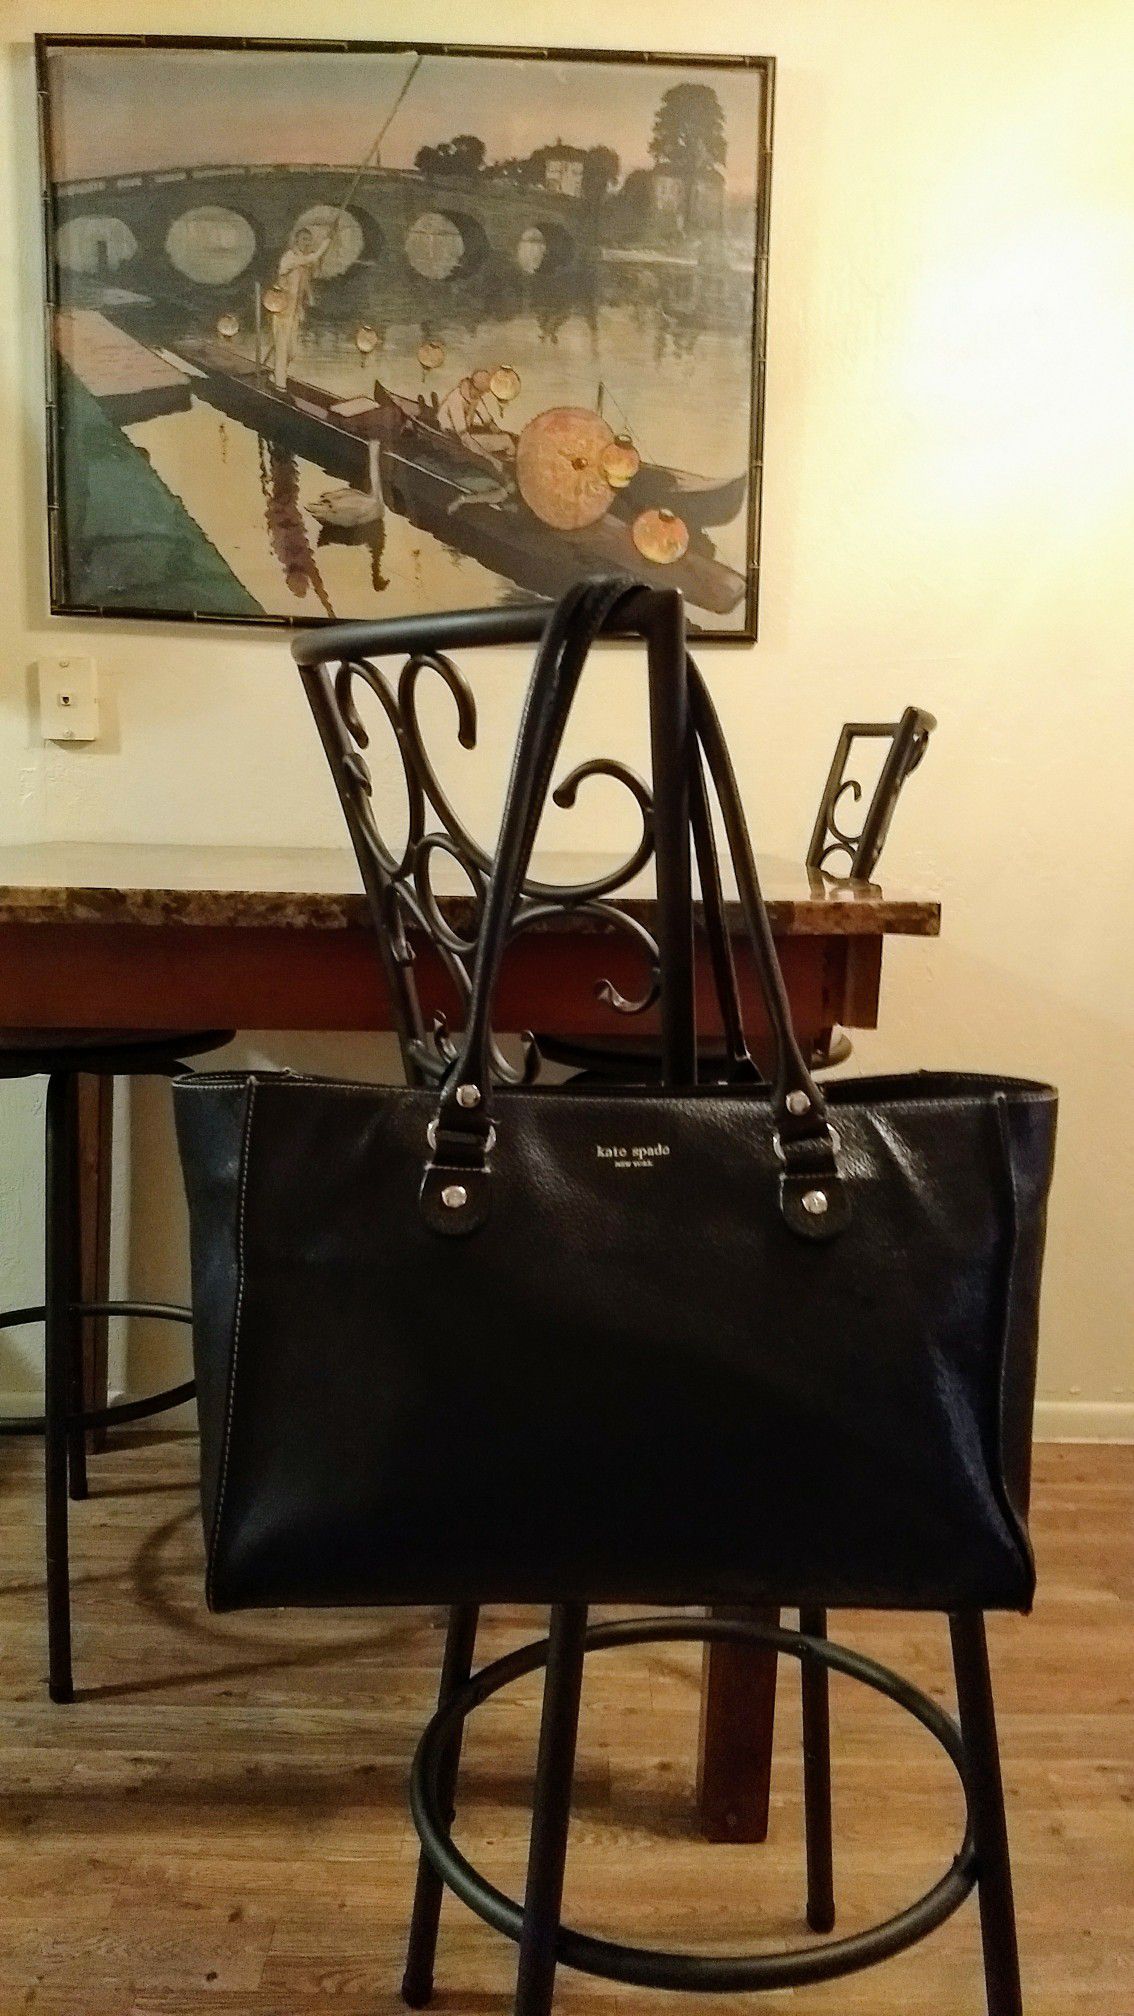 Kate Spade NWT Large Tote Pebbled Leather Parchment K6113